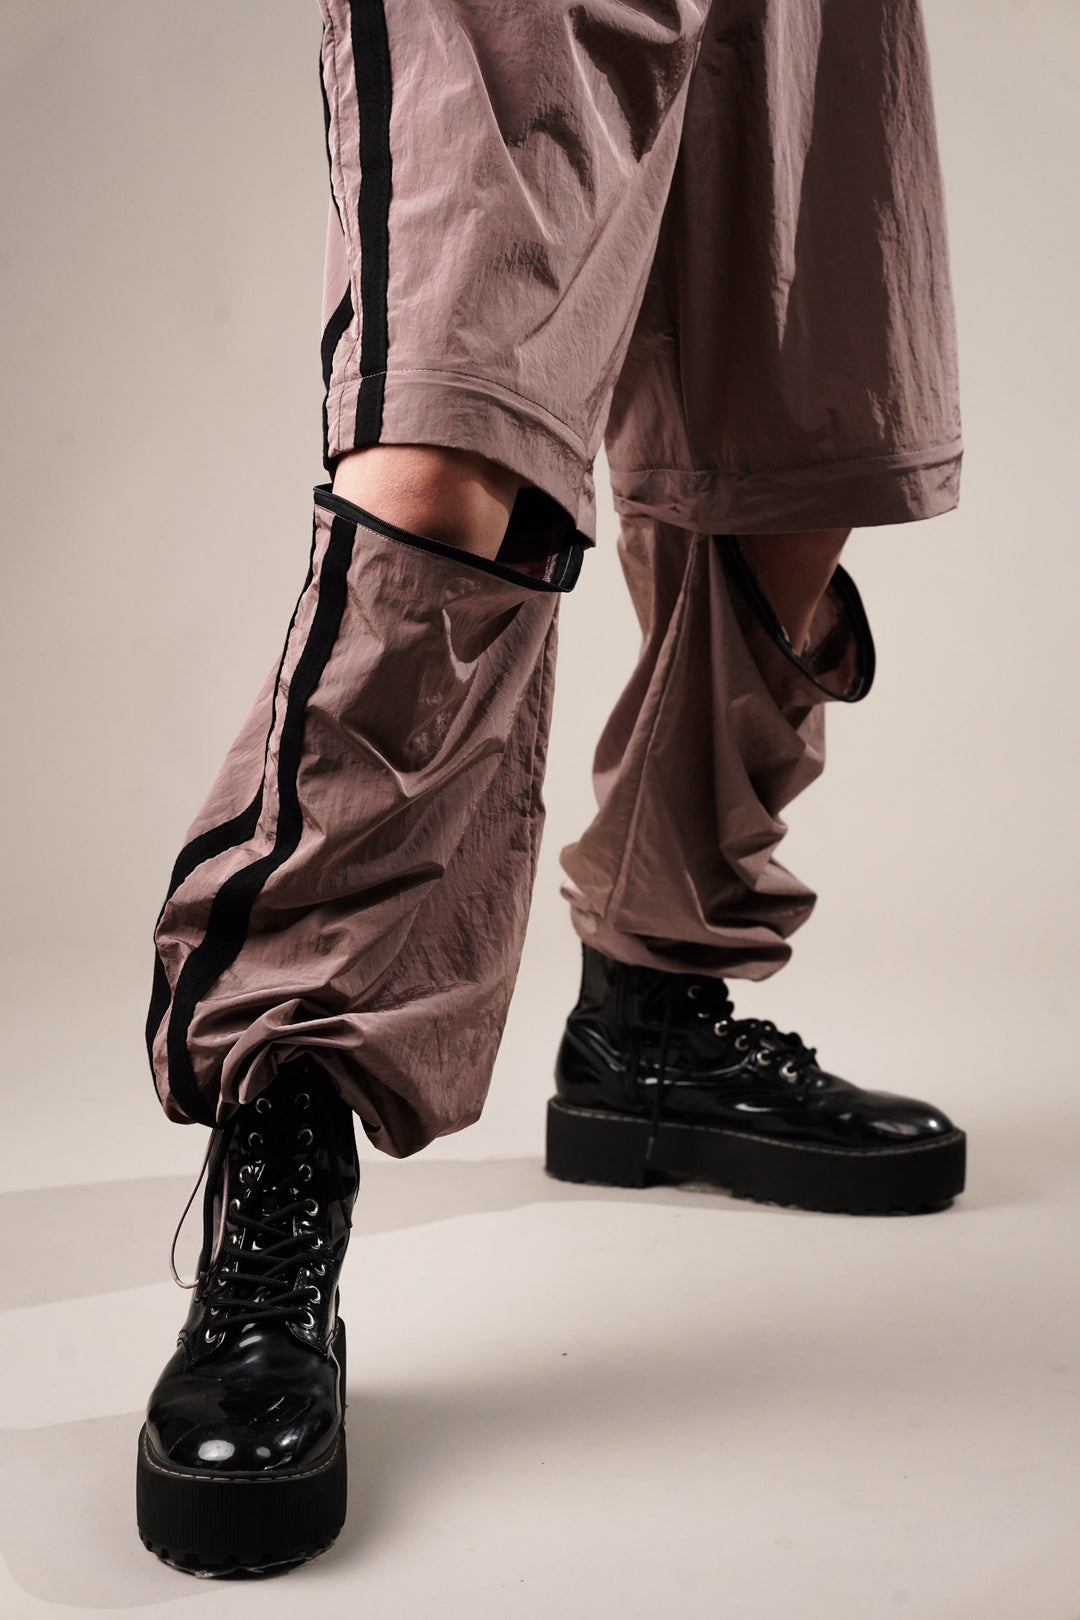 Rosewood dry fit trousers for everyday comfort